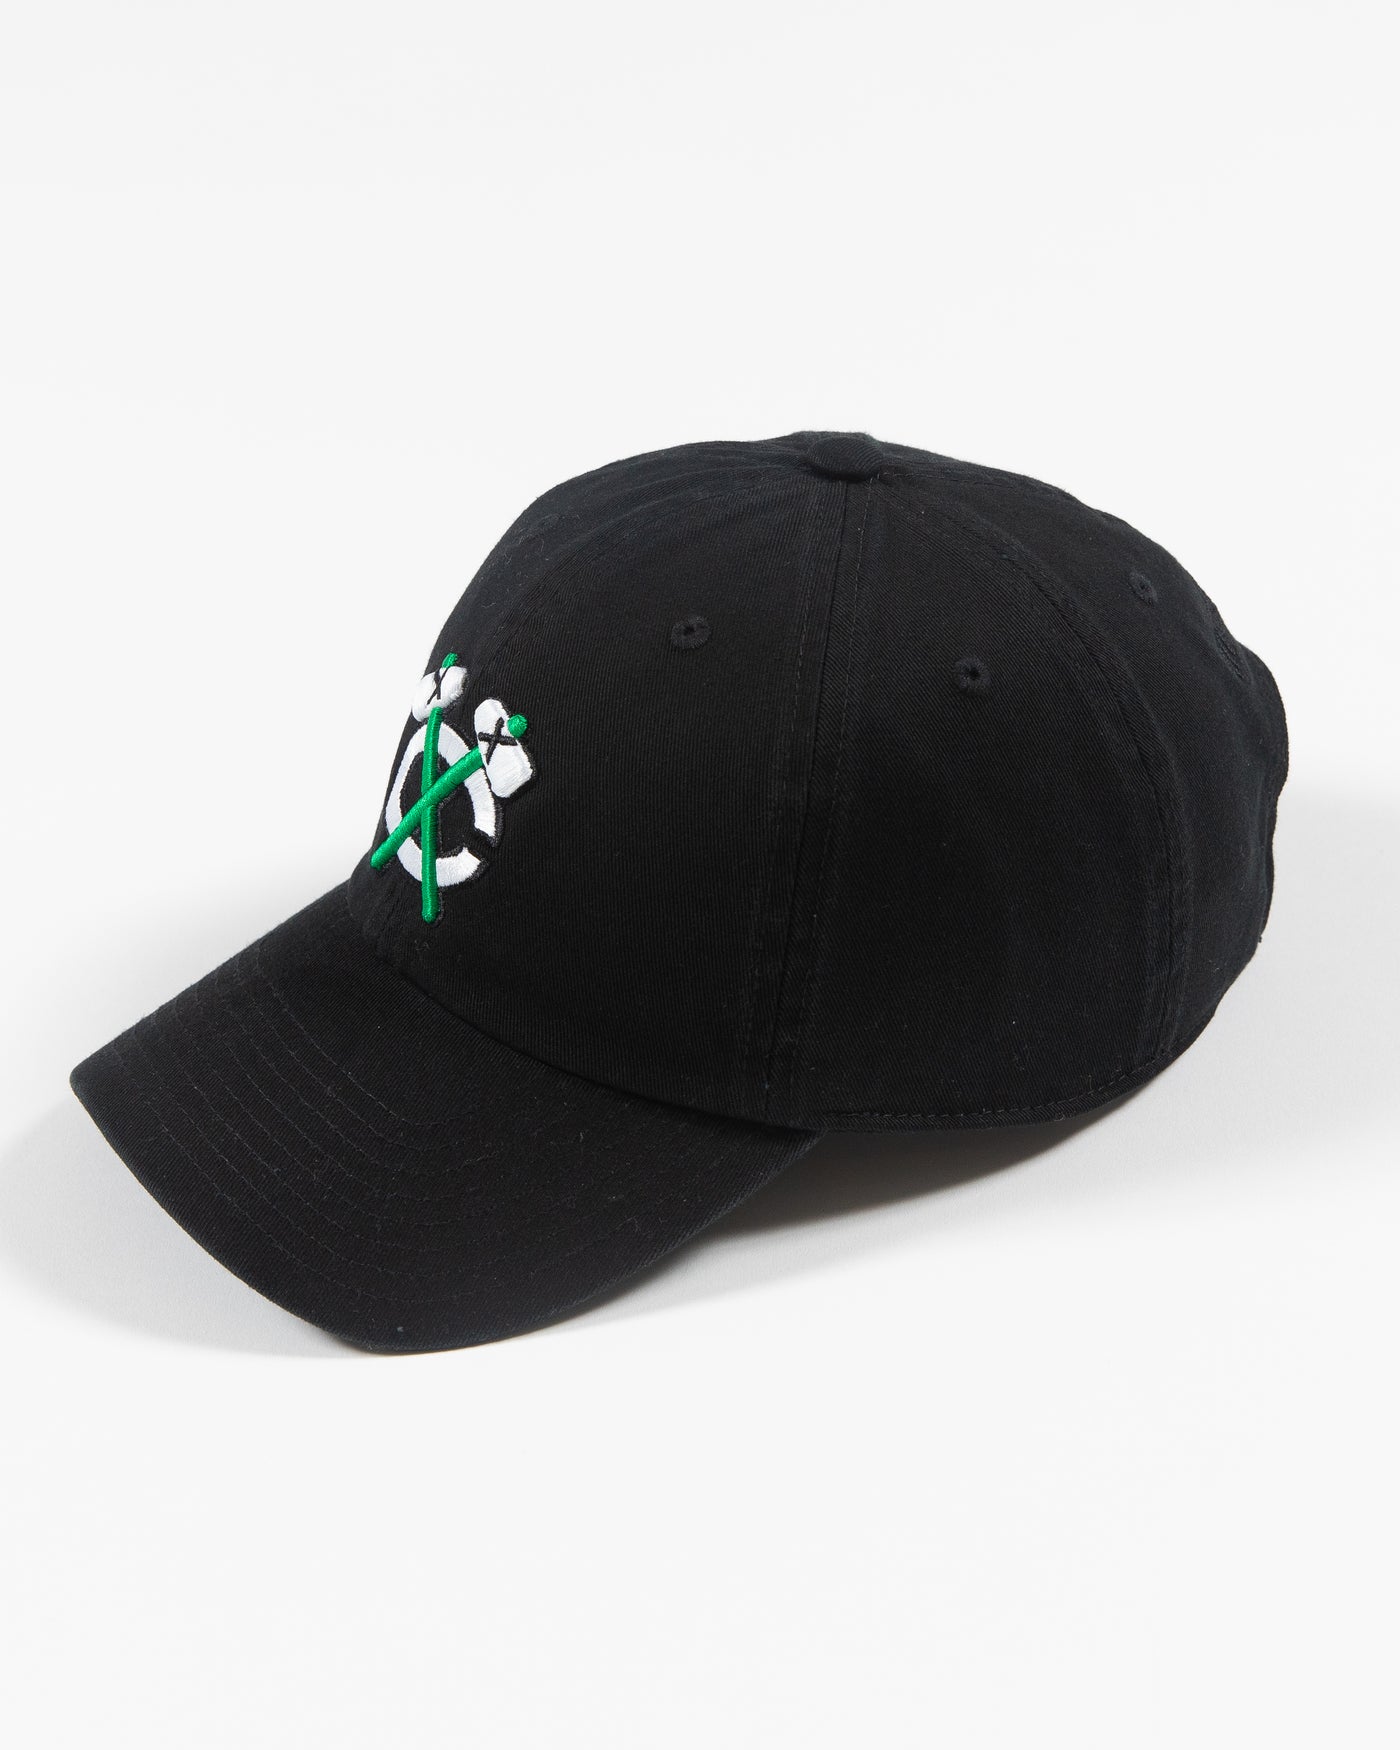 black adjustable cap with white and green Chicago Blackhawks secondary logo - left angle lay flat